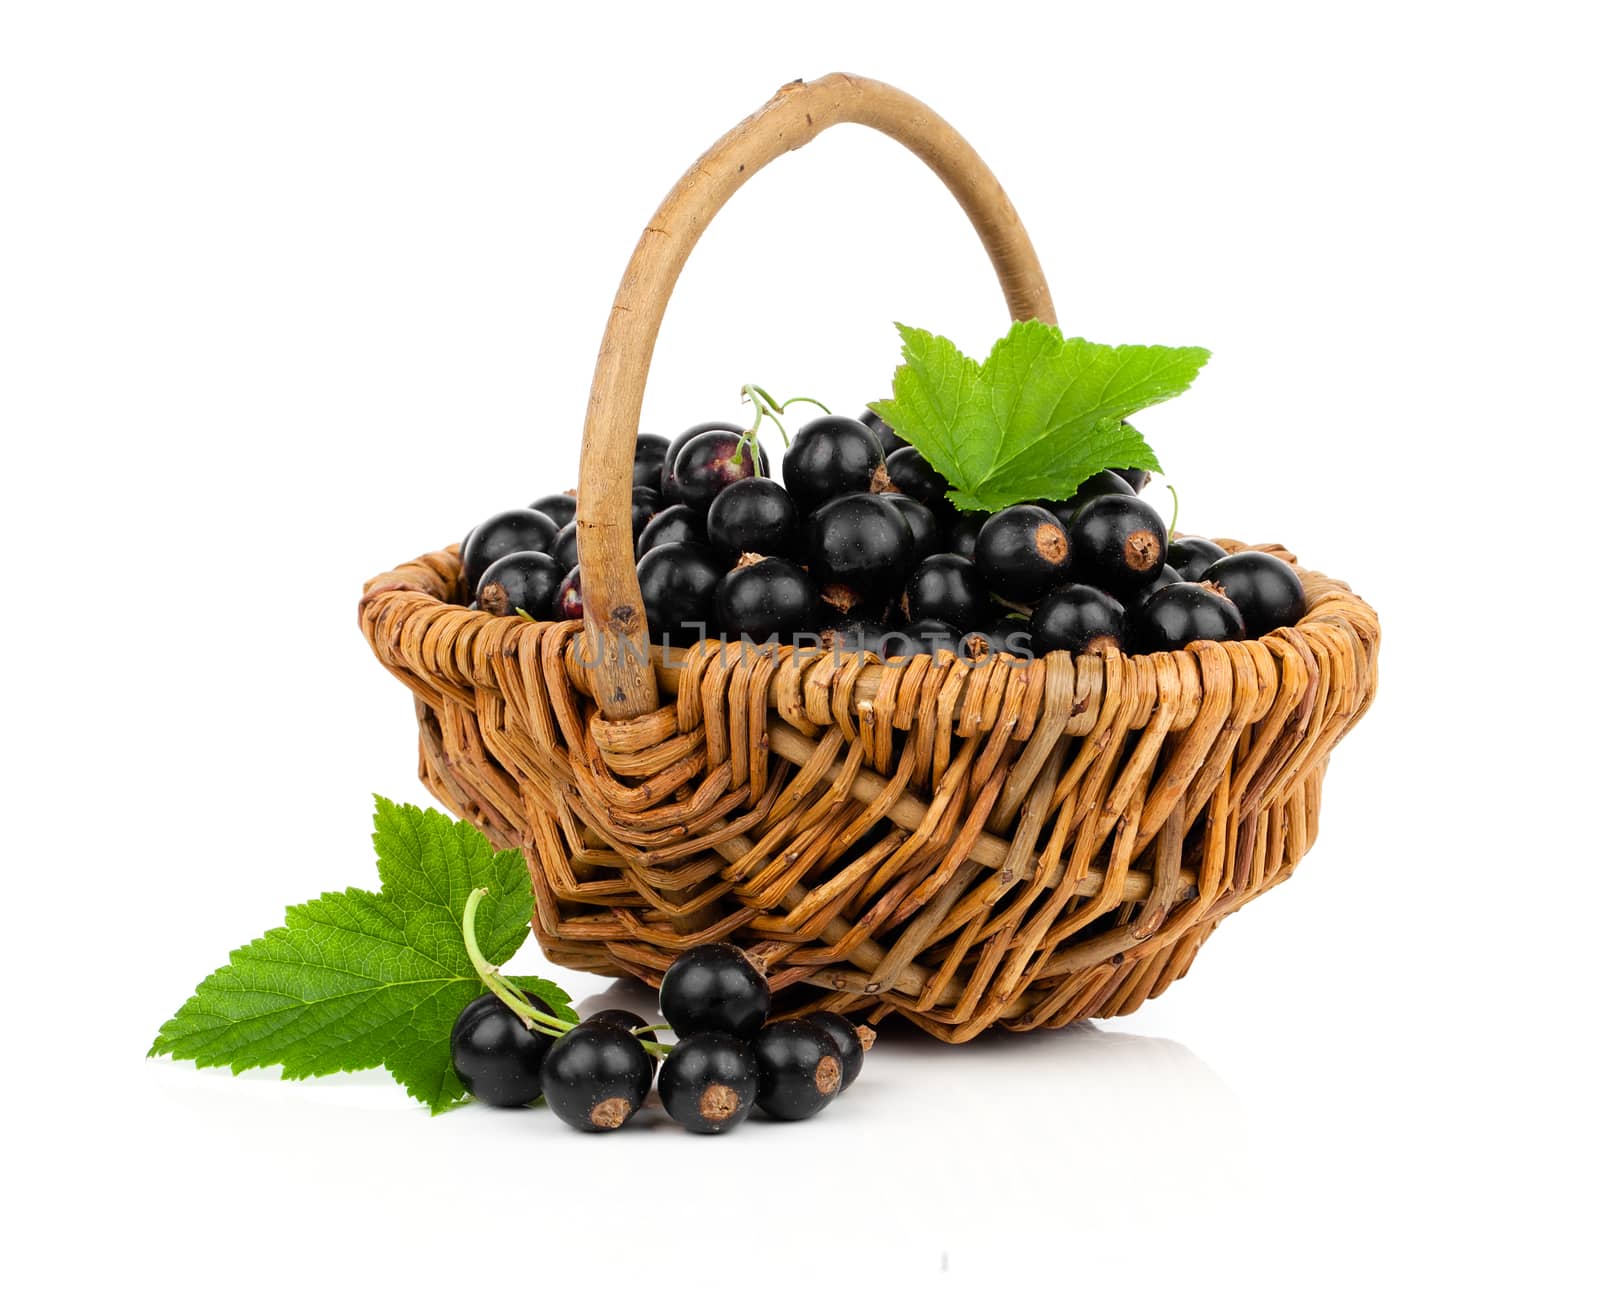 black currant in a wicker basket, on a white background